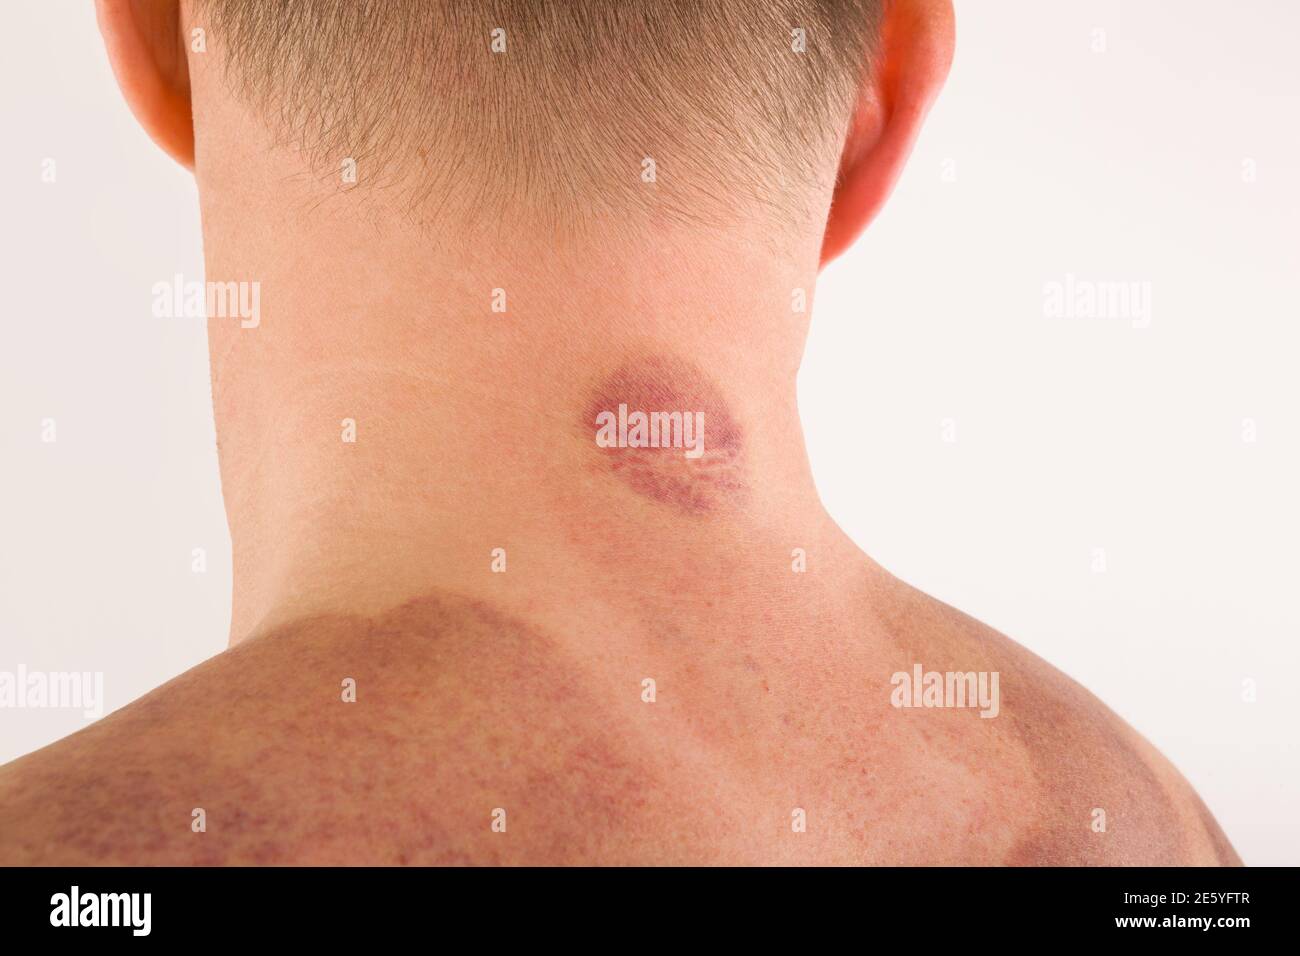 Cupping therapy marks on handsome man's back. Massage and wellness concept  Stock Photo - Alamy